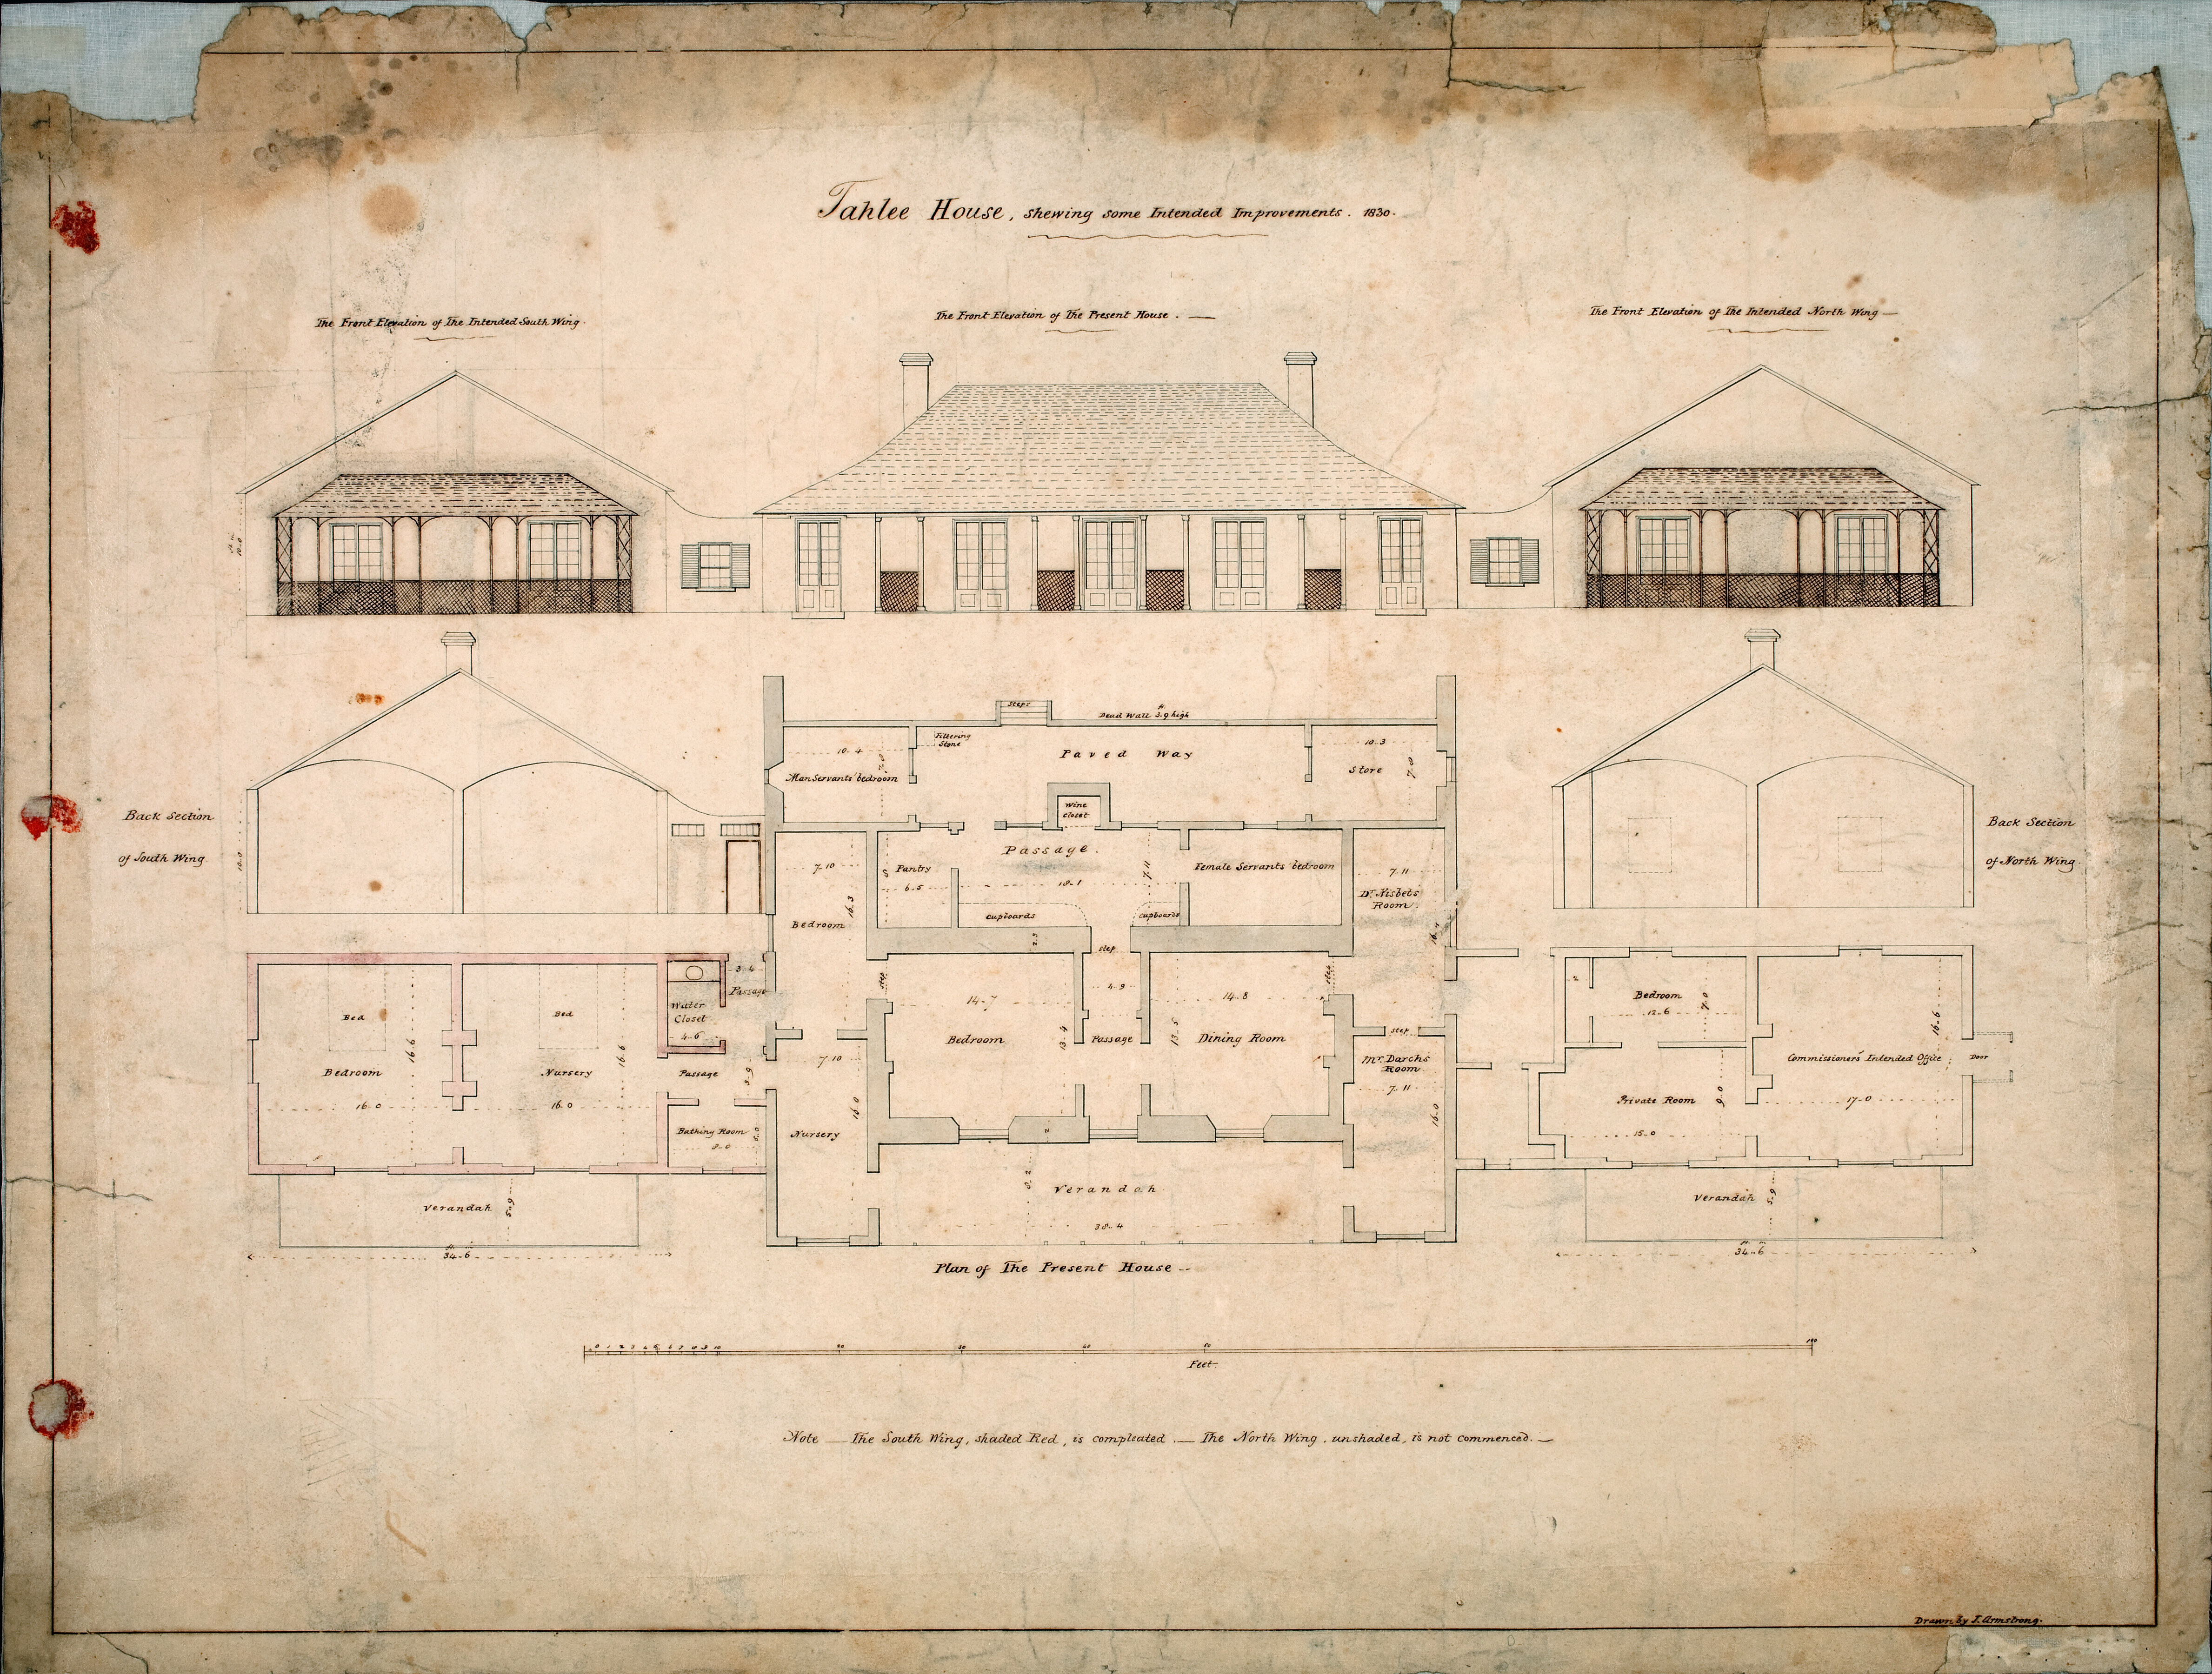 Tahlee House, Port Stephens Estate, 1830 (1-464, P11). Drawn by Australian Agricultural Company surveyor John Armstrong.